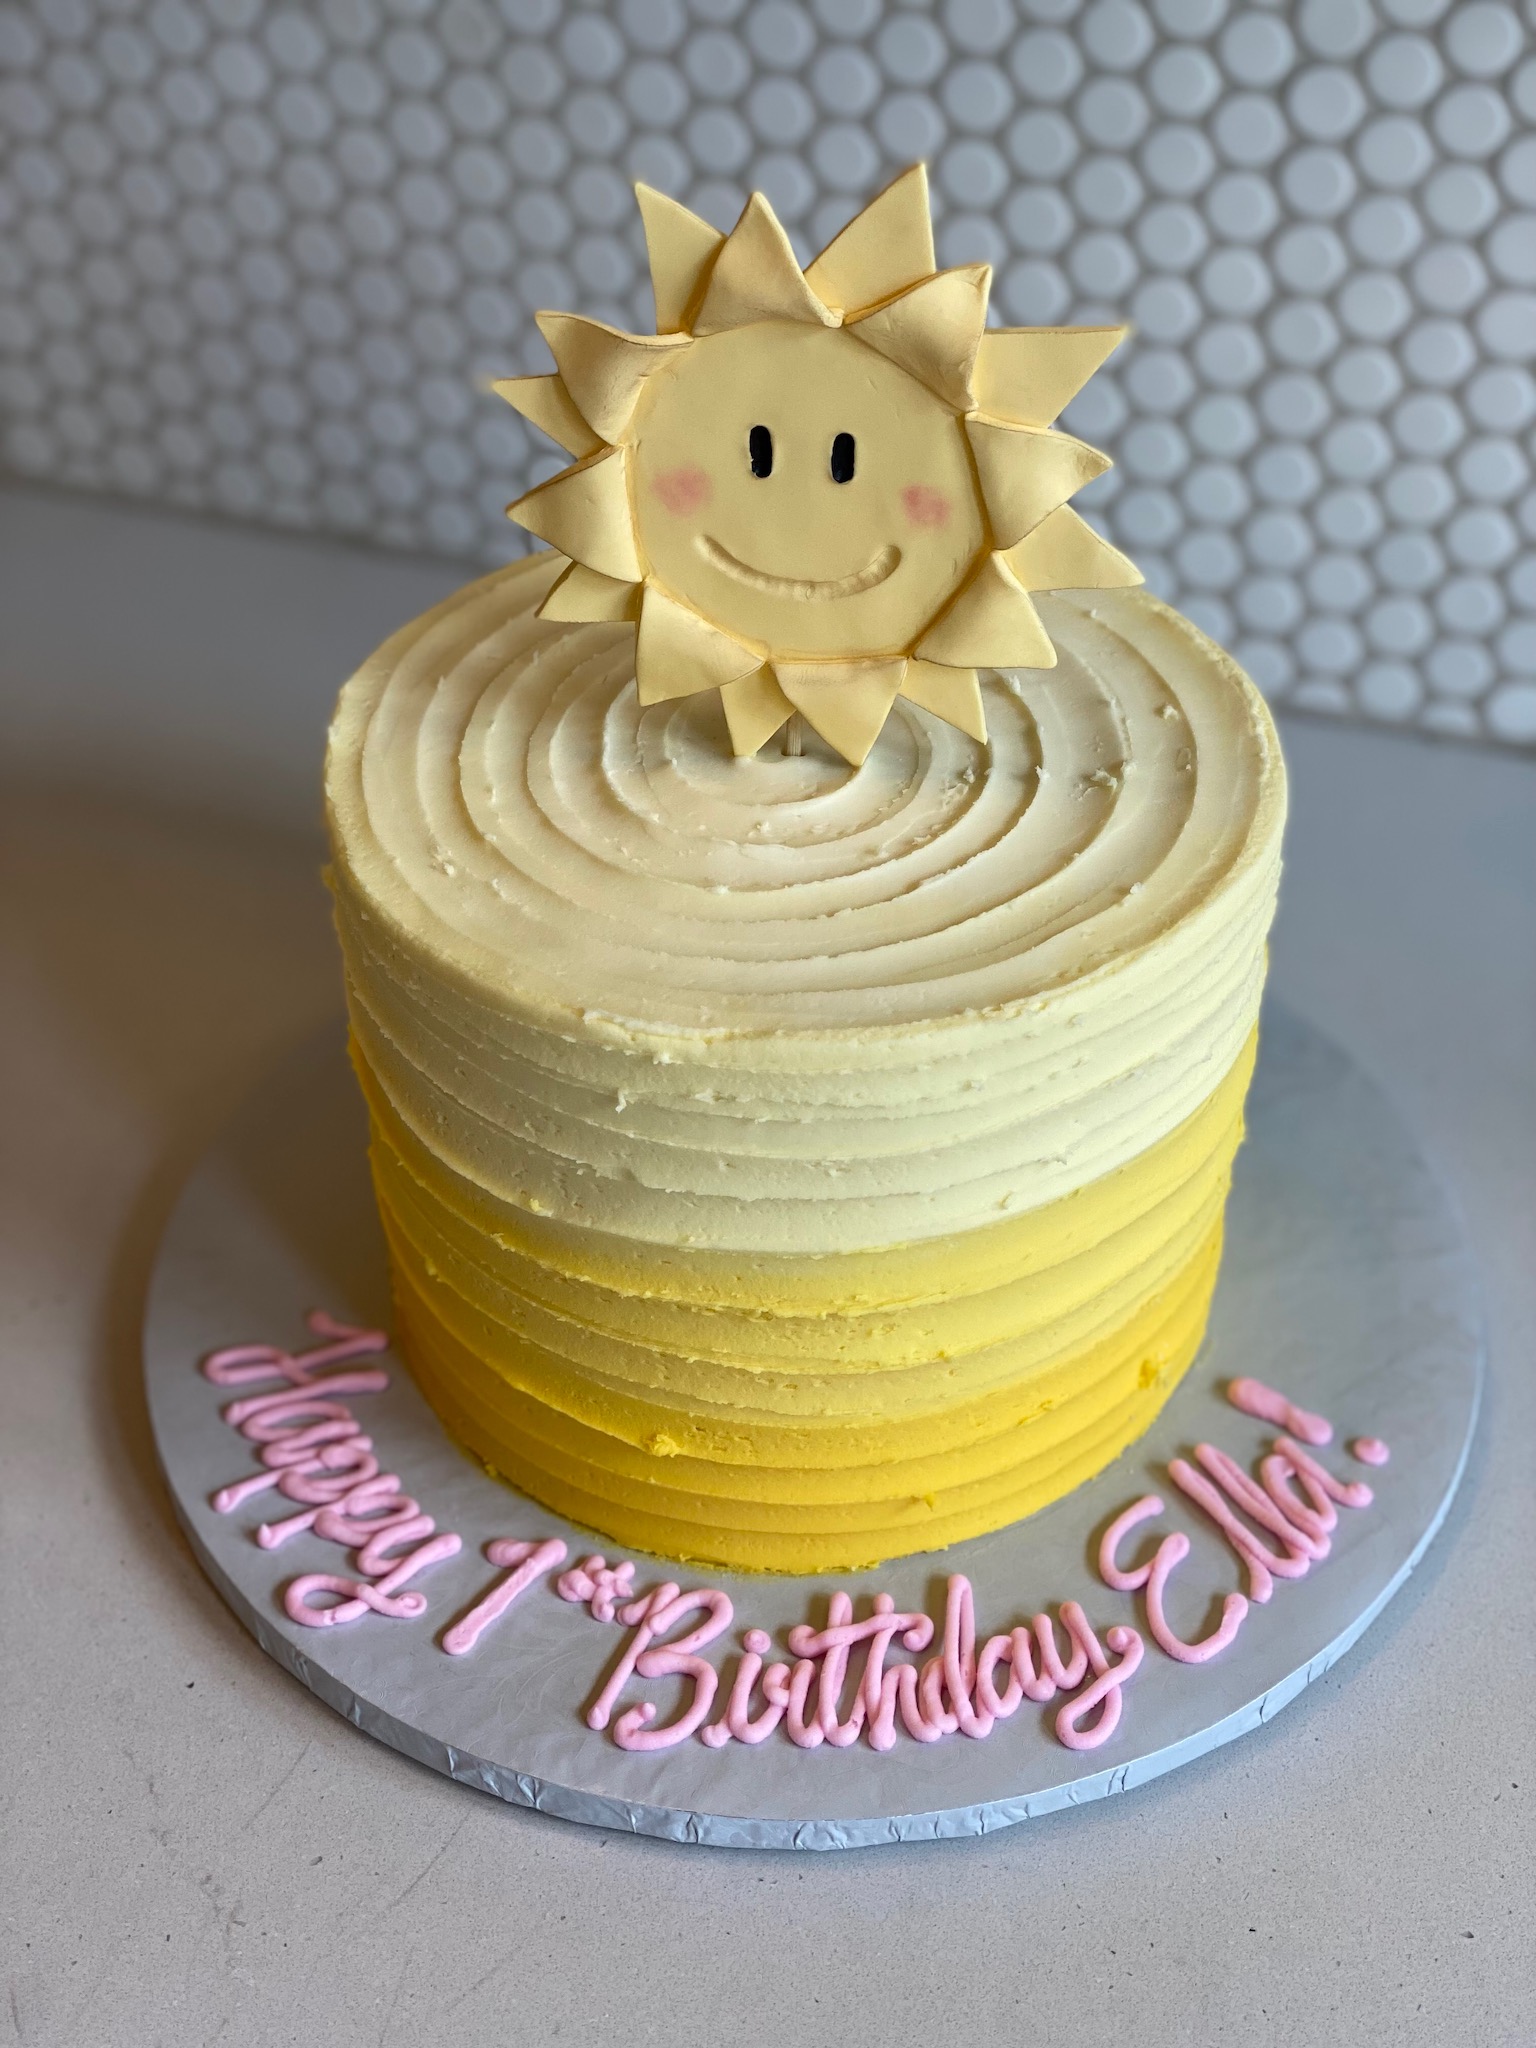 Round sun smiley birthday cake iced with graded color flowing from a vivid sunshine yellow to a pastel muted yellow. The icing is done in a grooved design and on top of the cake is a vertically standing fondant smiley faced sun, similar in design to the head of a sunflower.